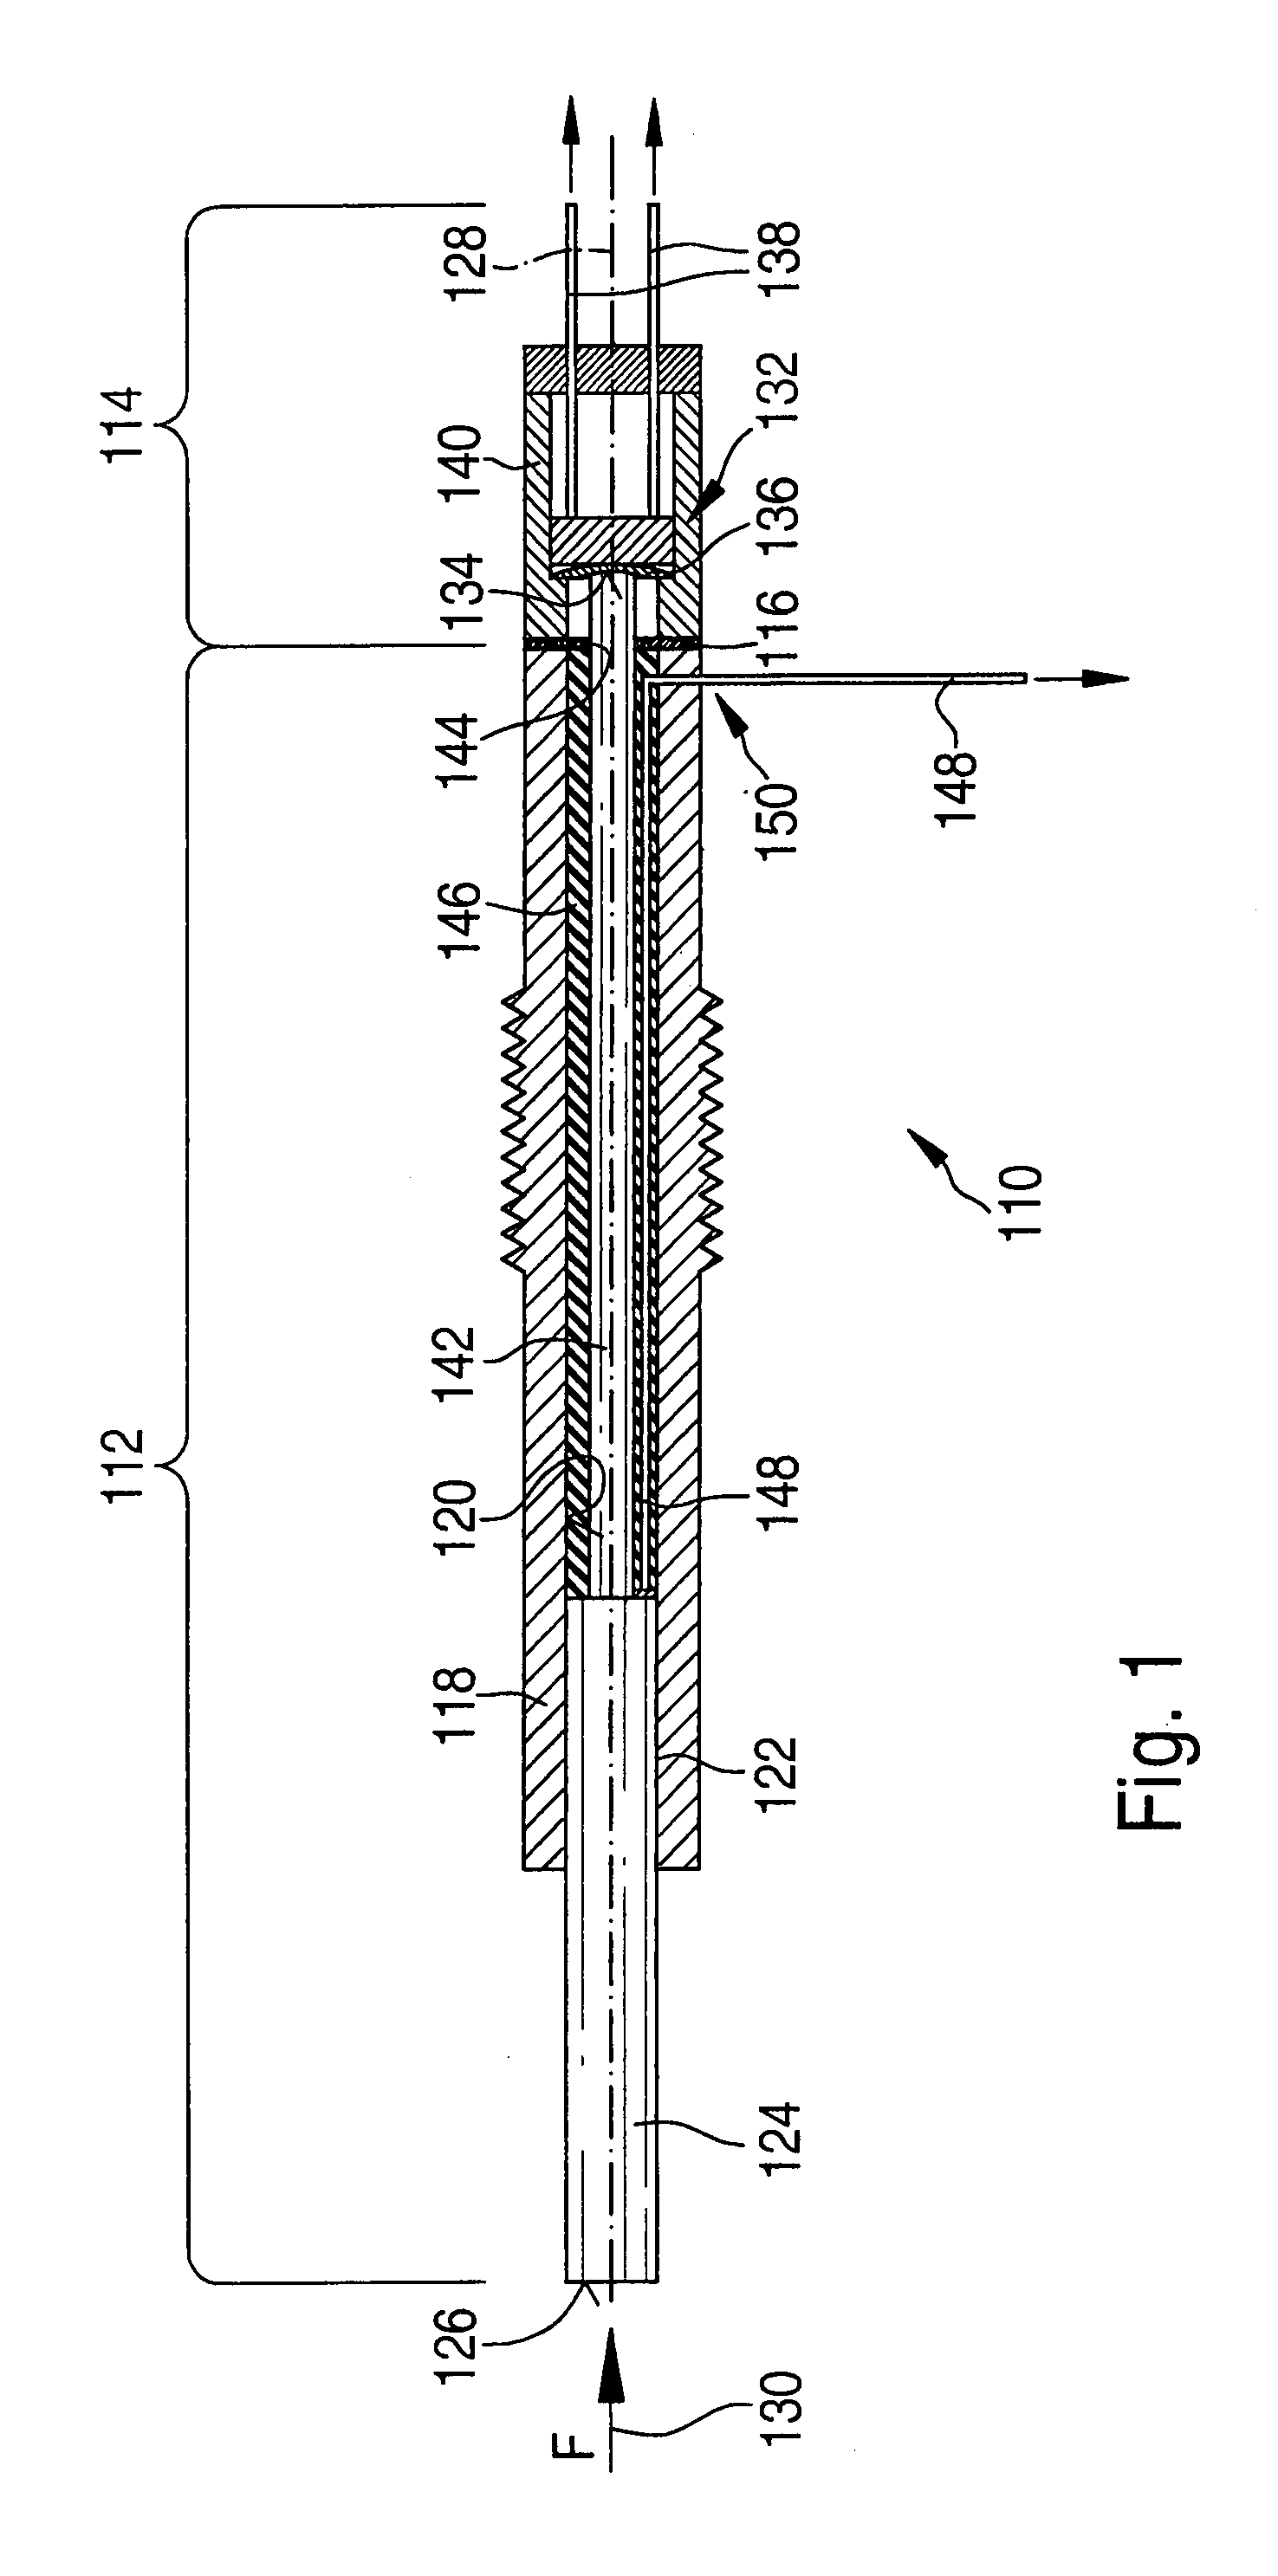 Sheathed Element Glow Plug Having an Integrated Pressure Measuring Element